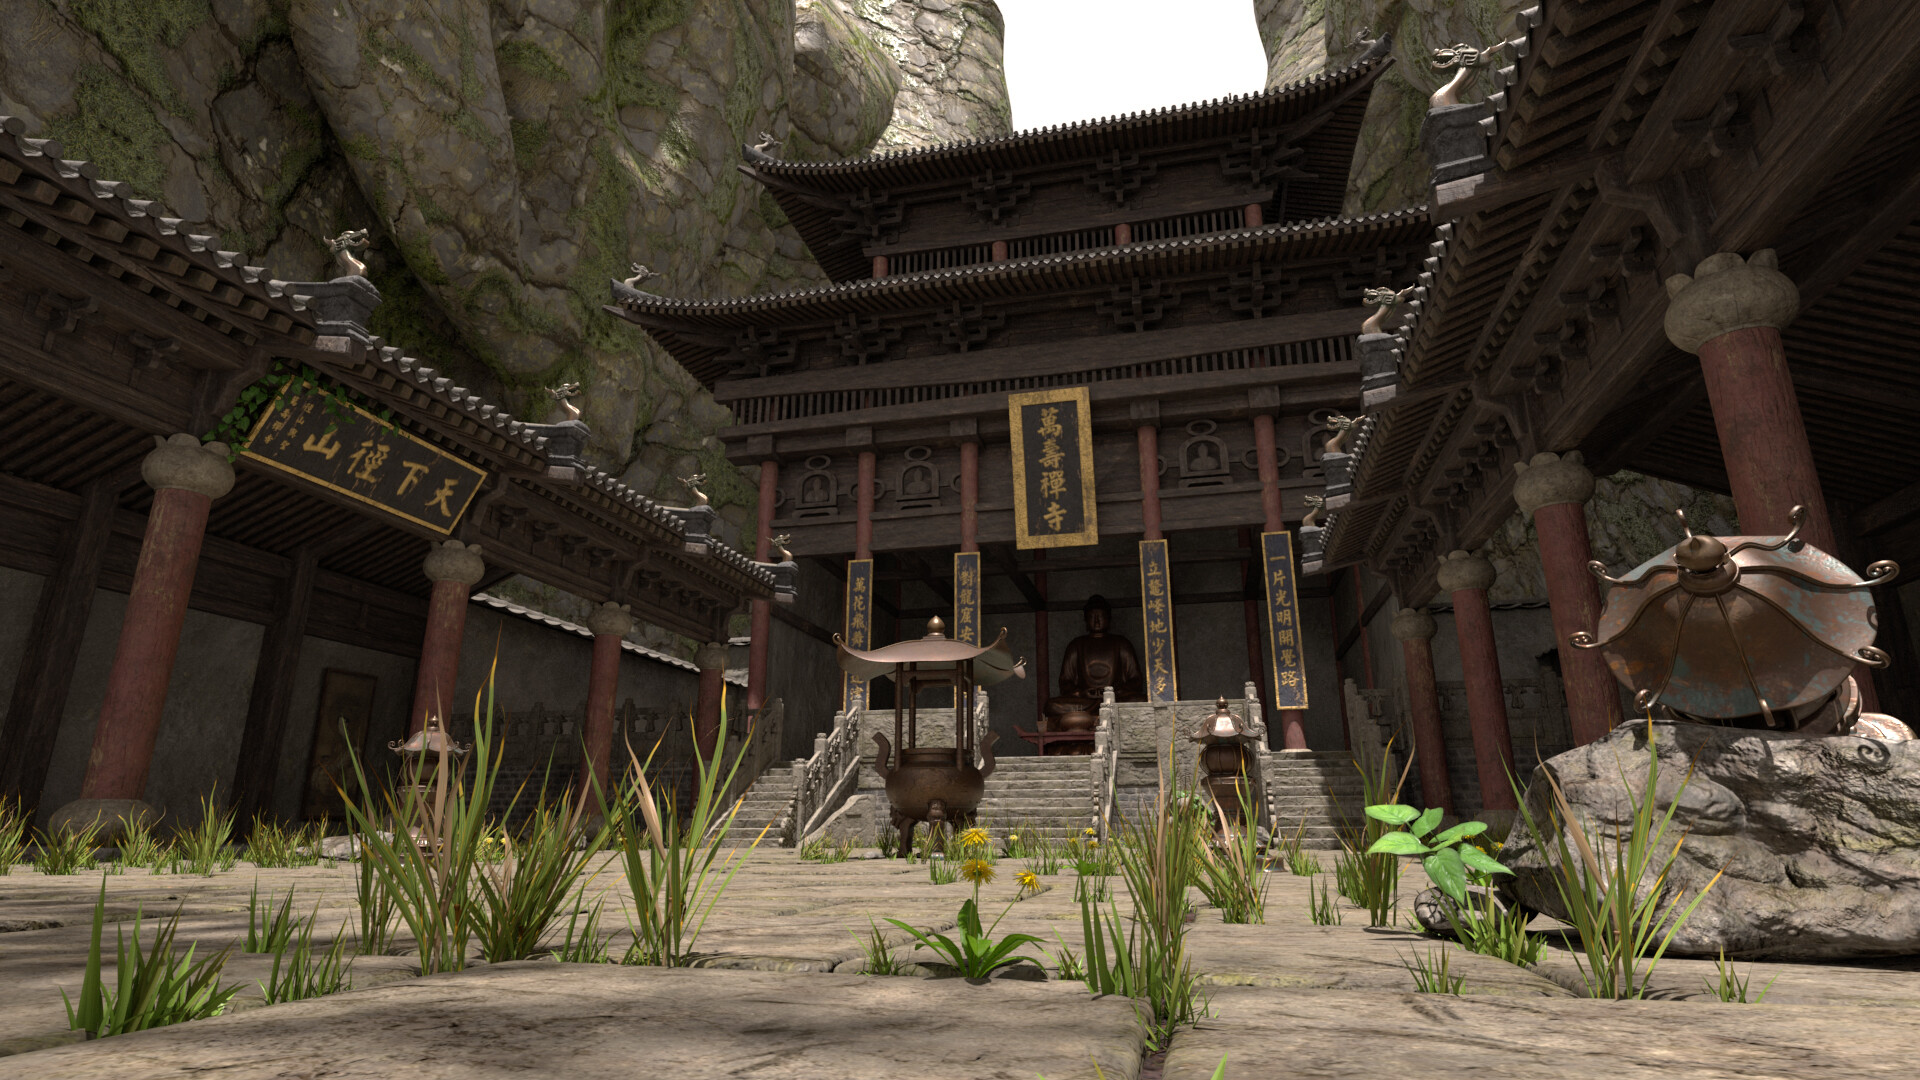 3D rendering of a temple